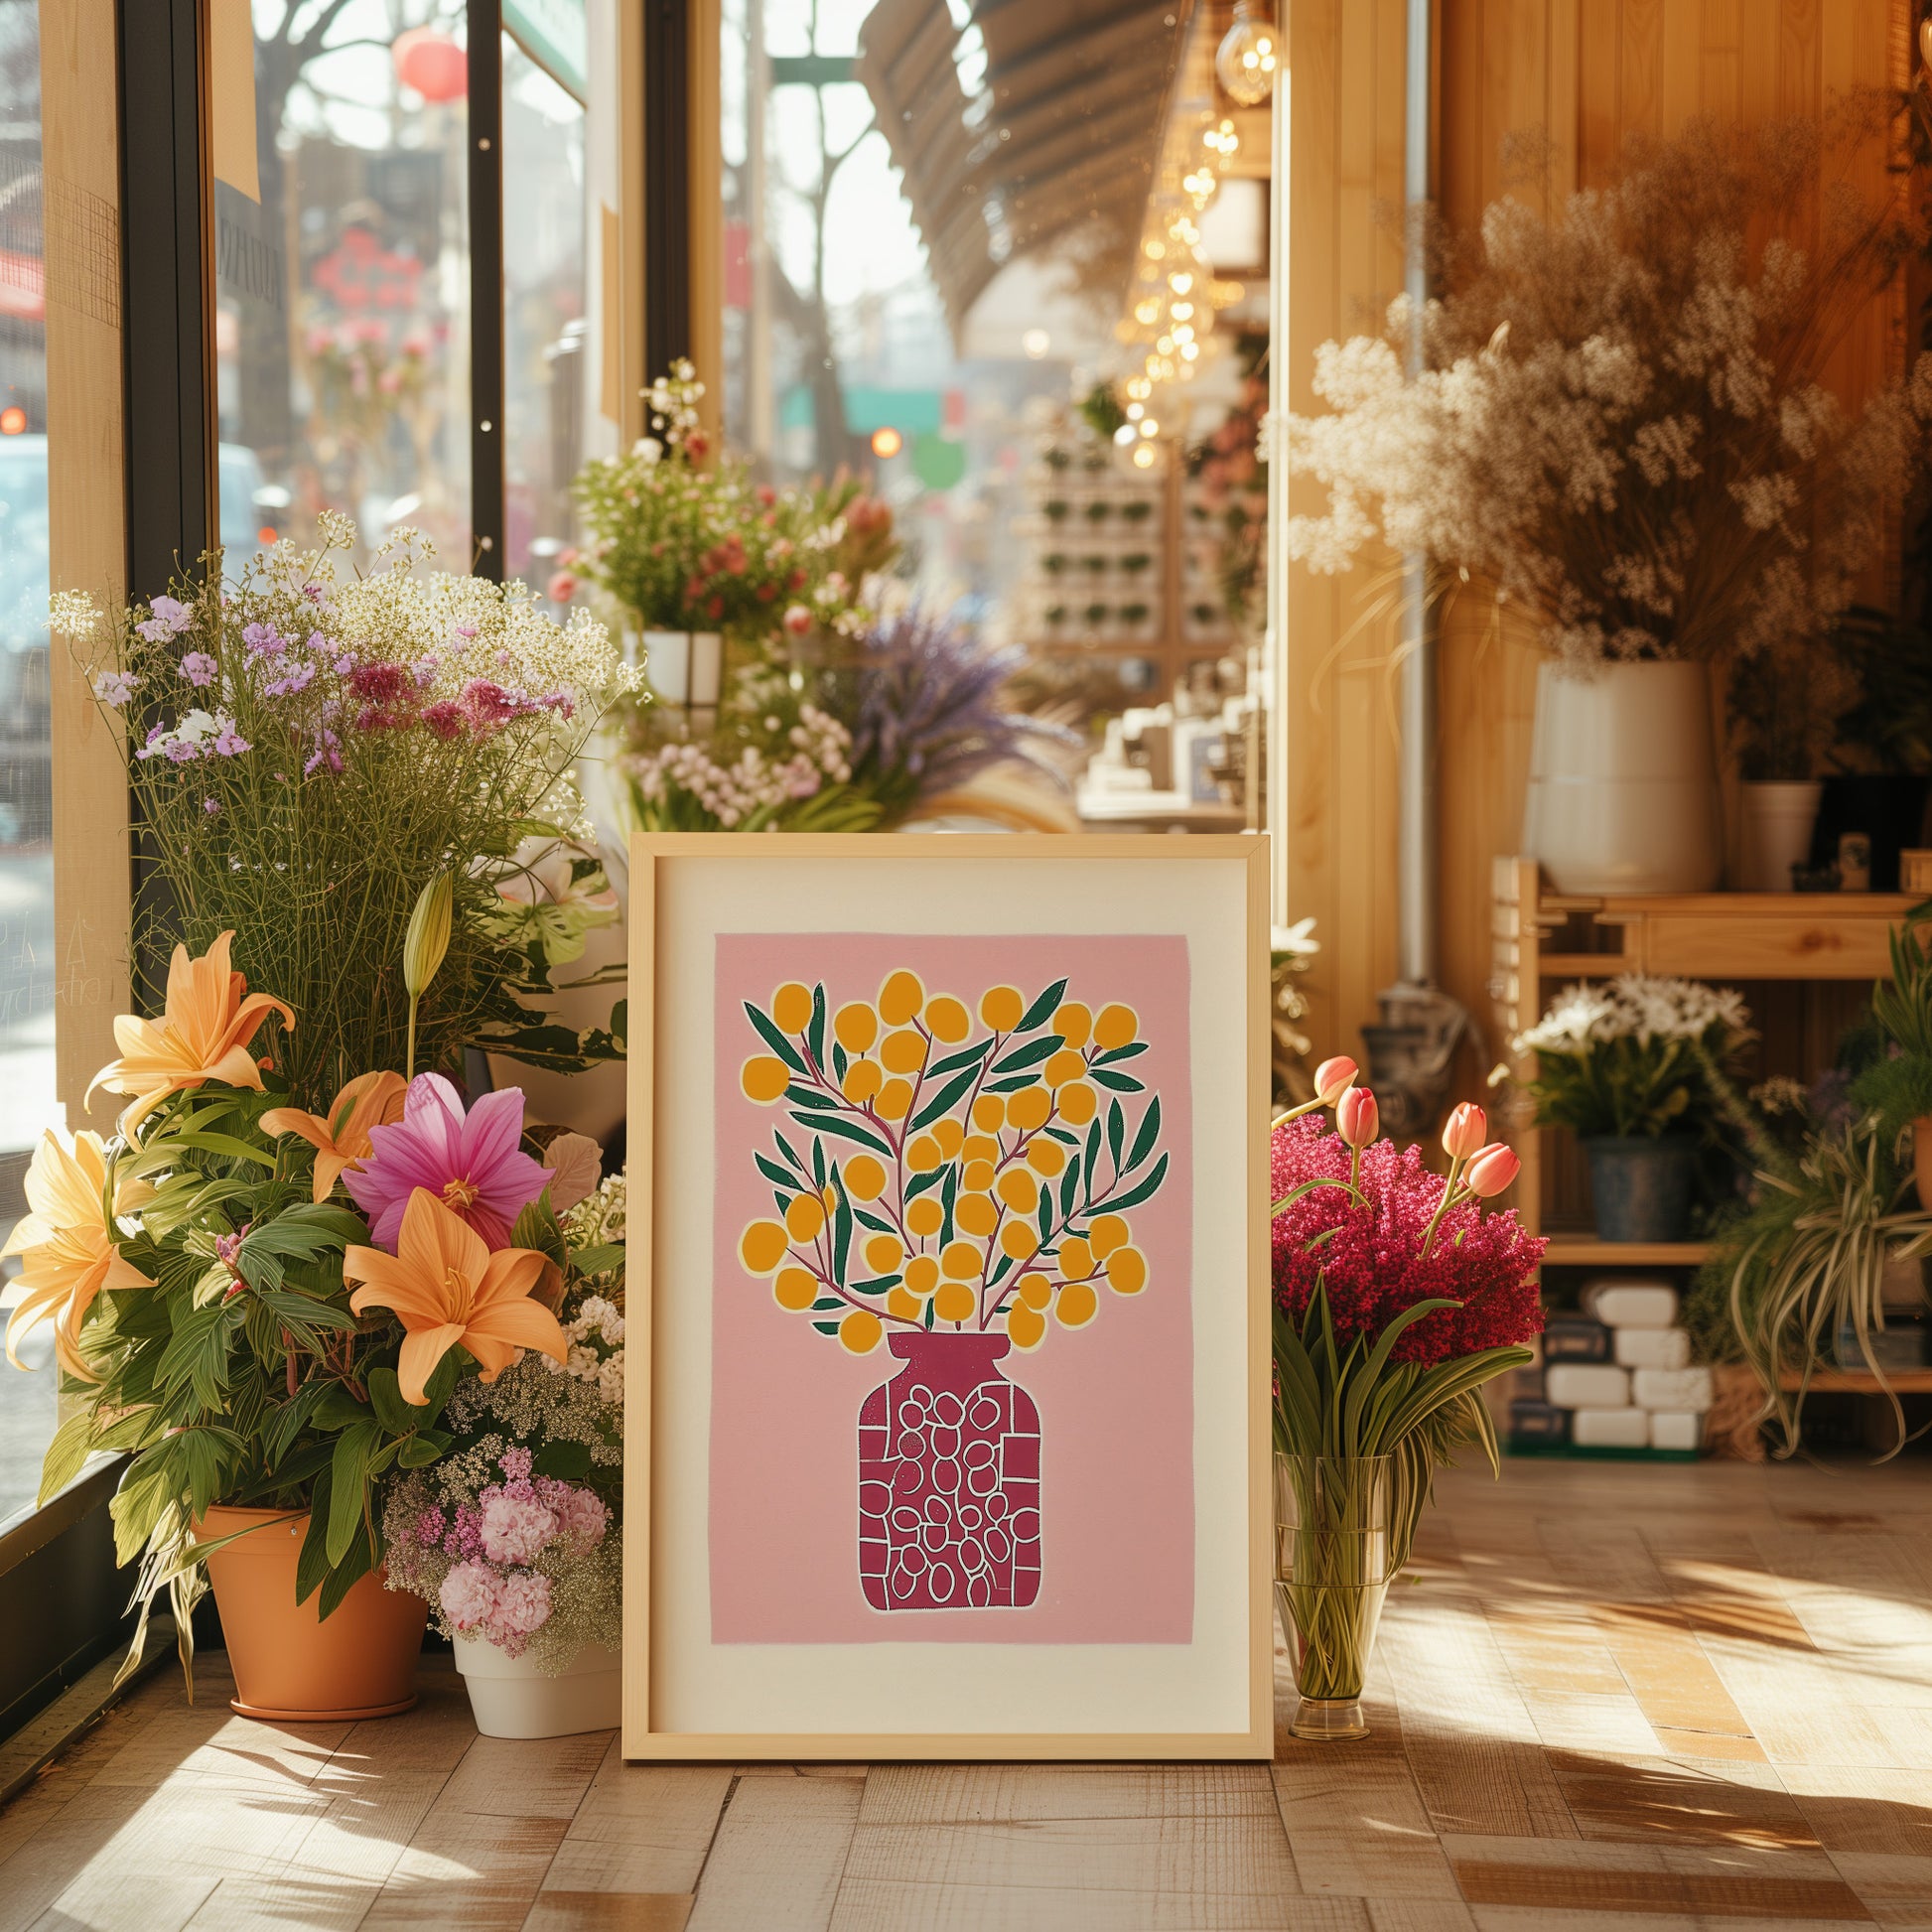 A colorful framed artwork of flowers in a vase beside potted plants in a sunny room.